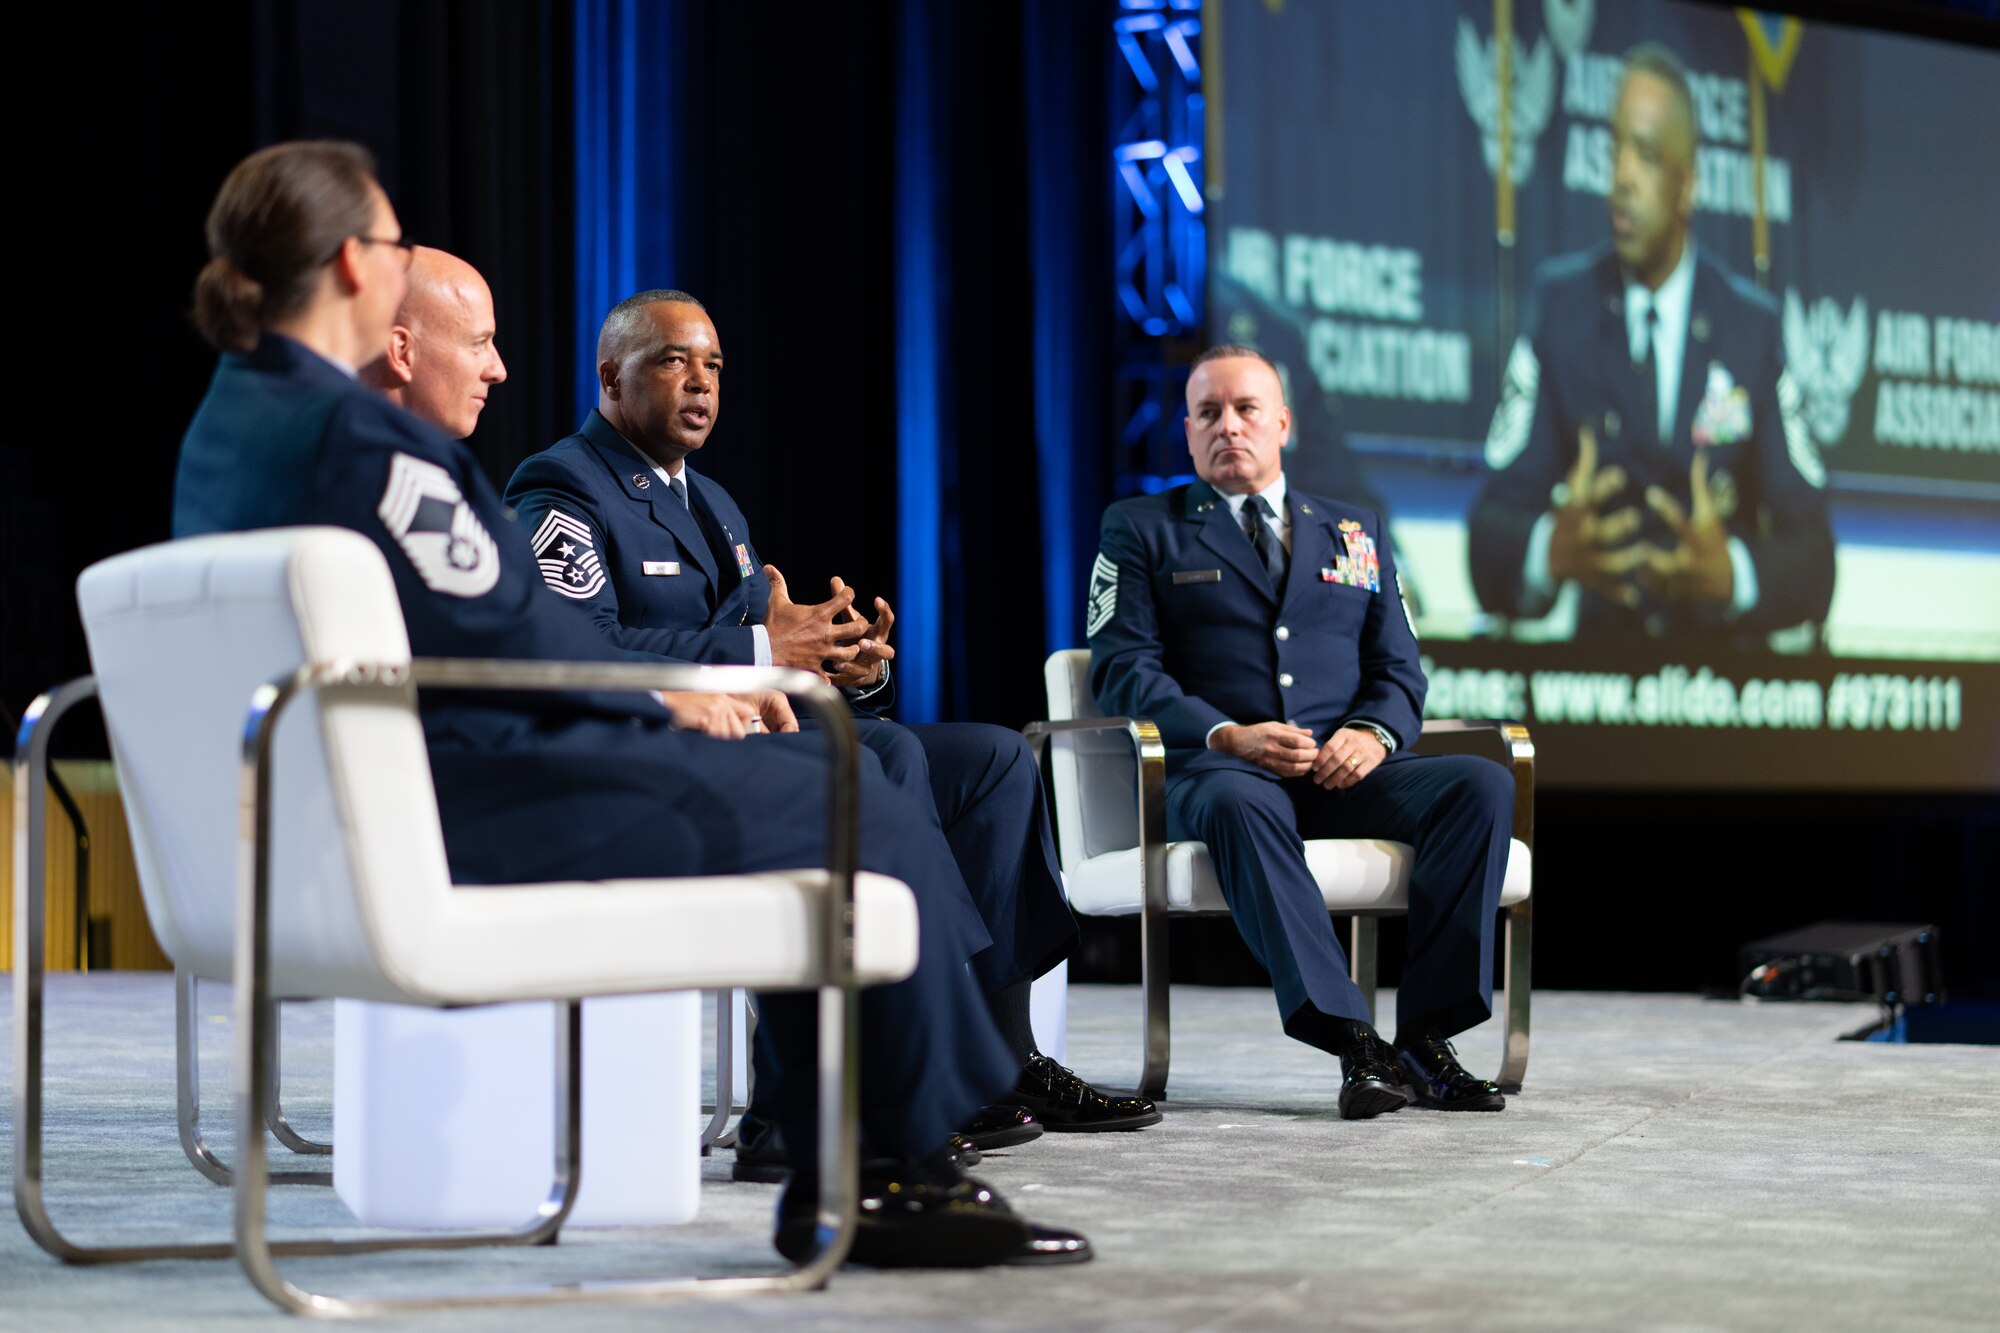 Chief Master Sgt. Timothy White speaks during the 2021 Air, Space & Cyberspace Conference Senior Enlisted Panel